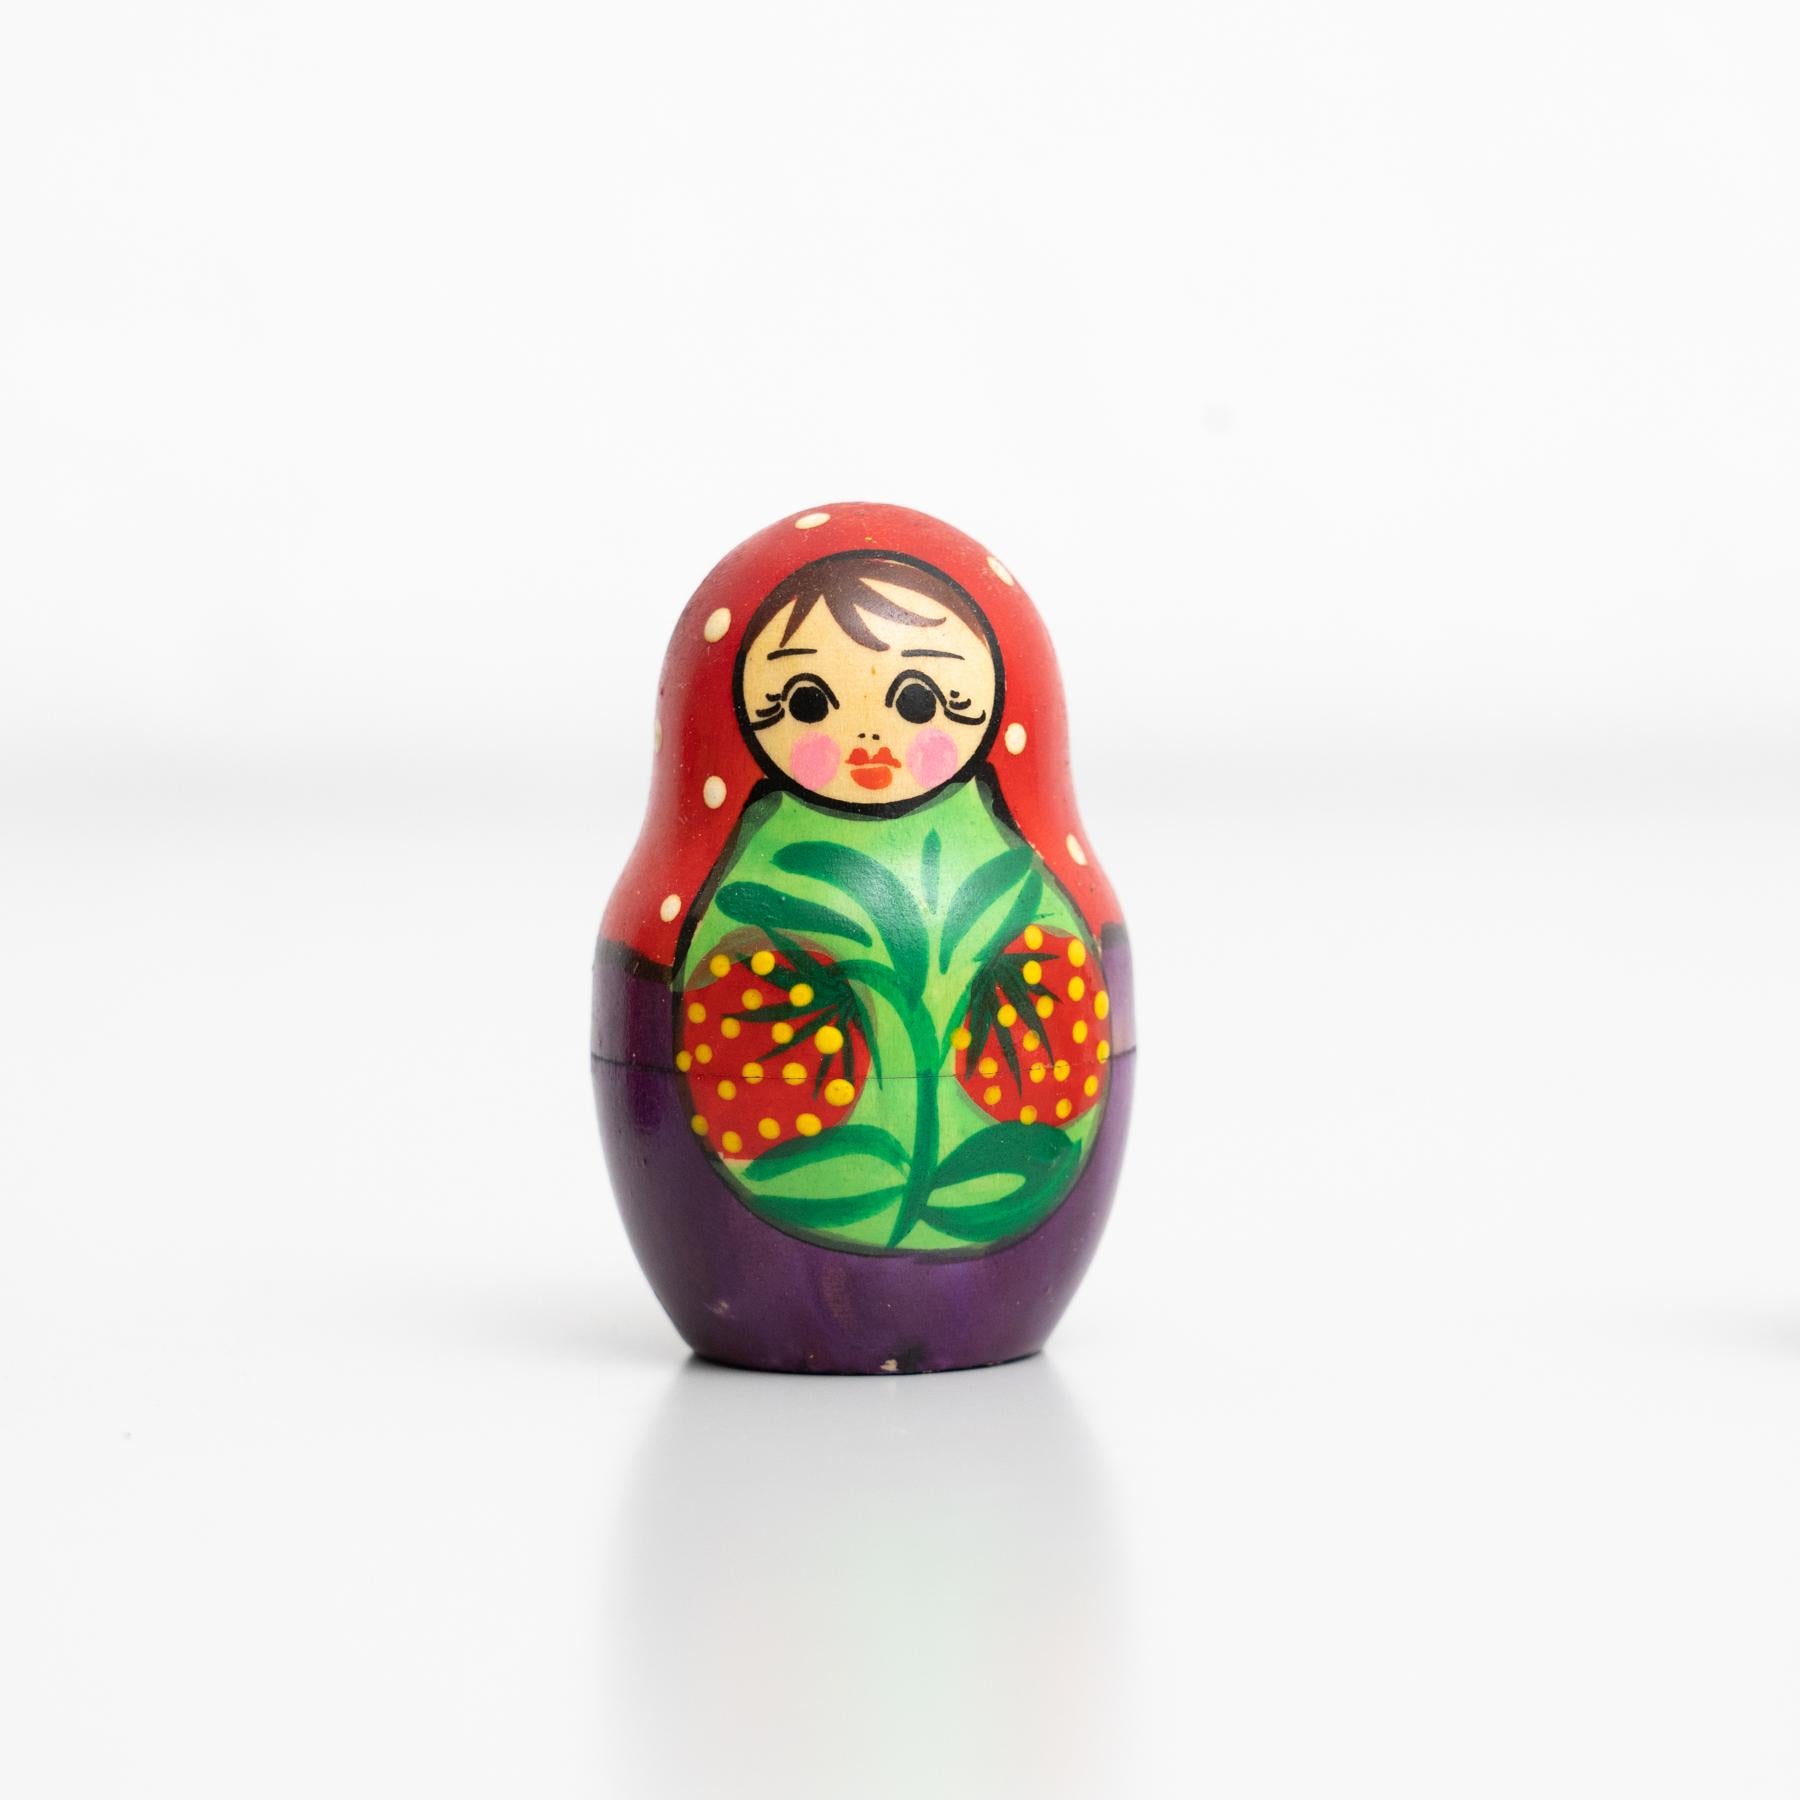 Antique Traditional Hand-Painted Wooden Russian Doll, circa 1960 For Sale 14